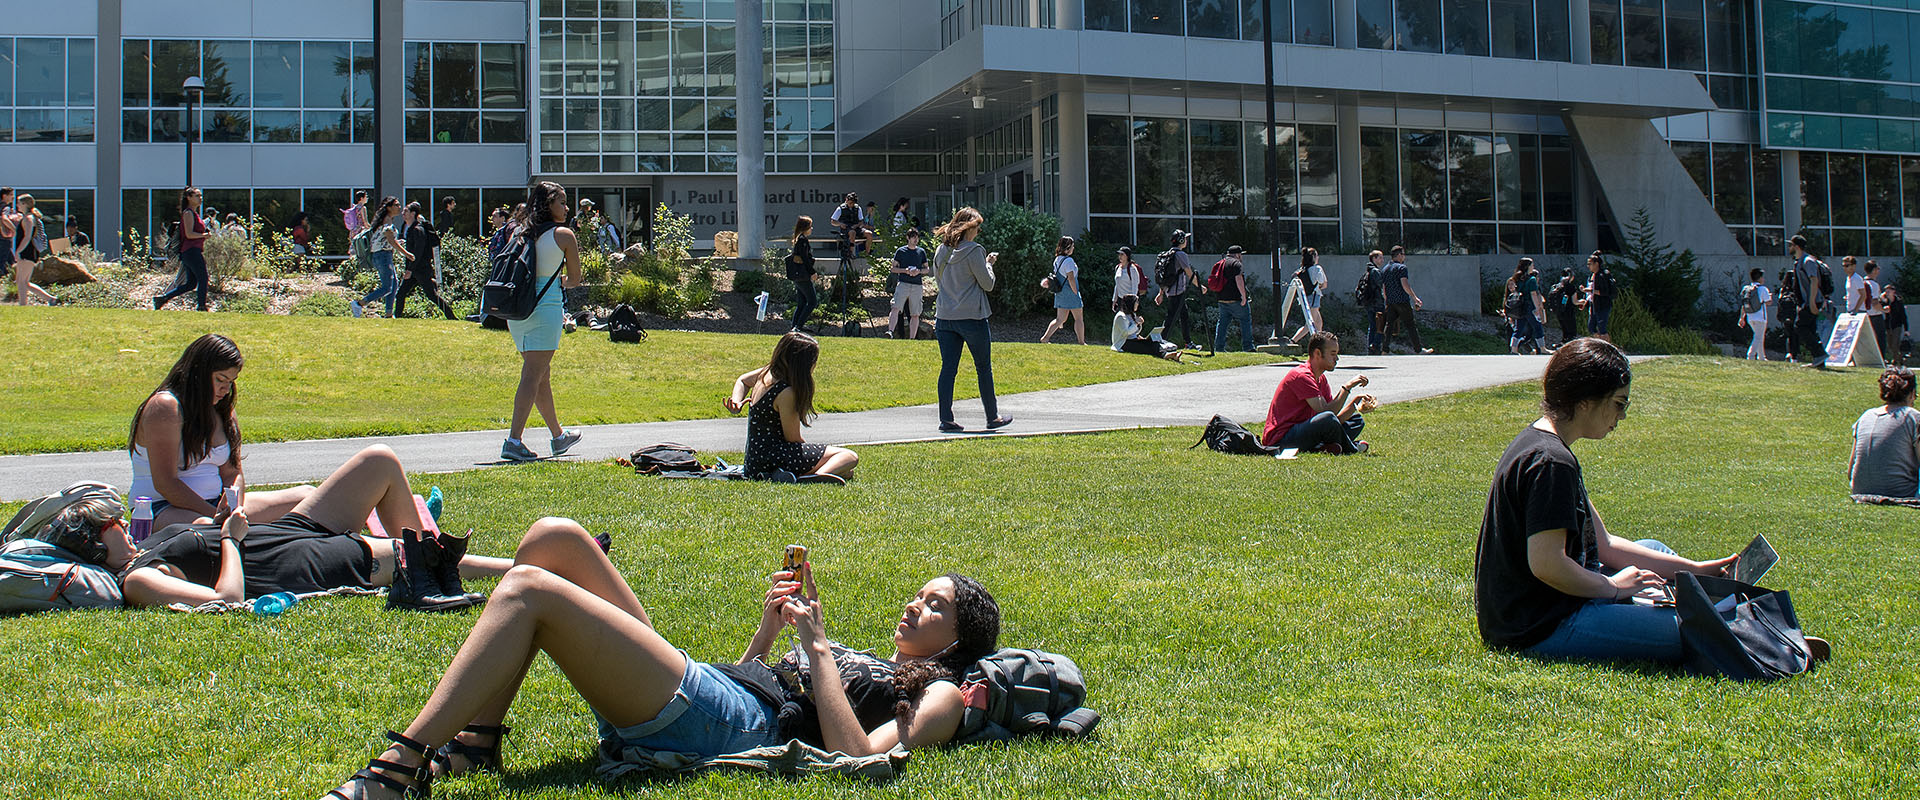 Students enjoy the sunshine on the grass at the SF State campus